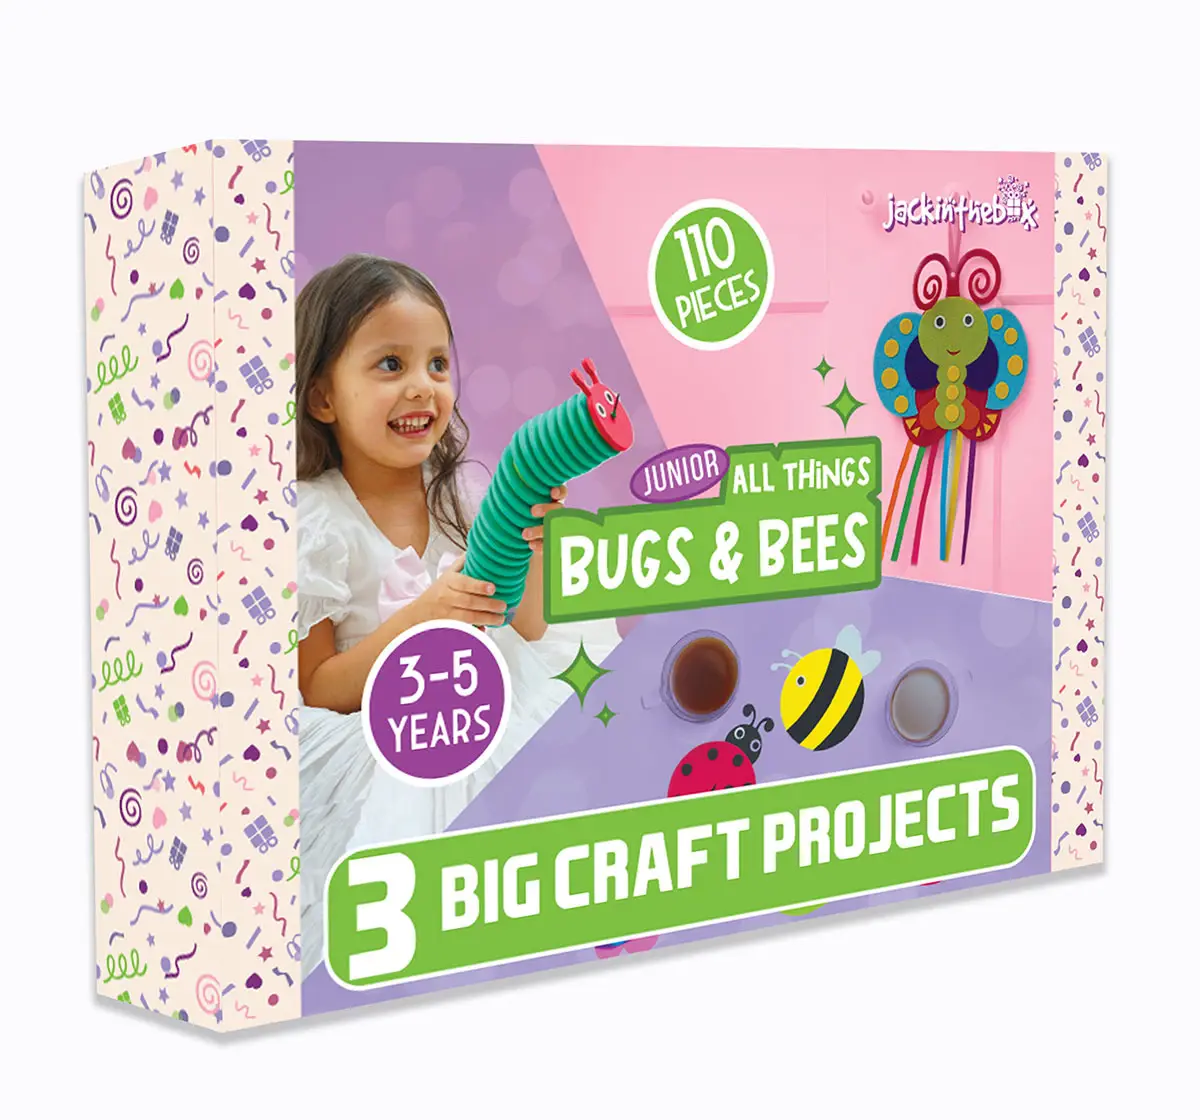 Jack In The Box Bugs and Bees Themed Art and Craft 3-in-1 Kit For Kids of Age 3Y+, Multicolour